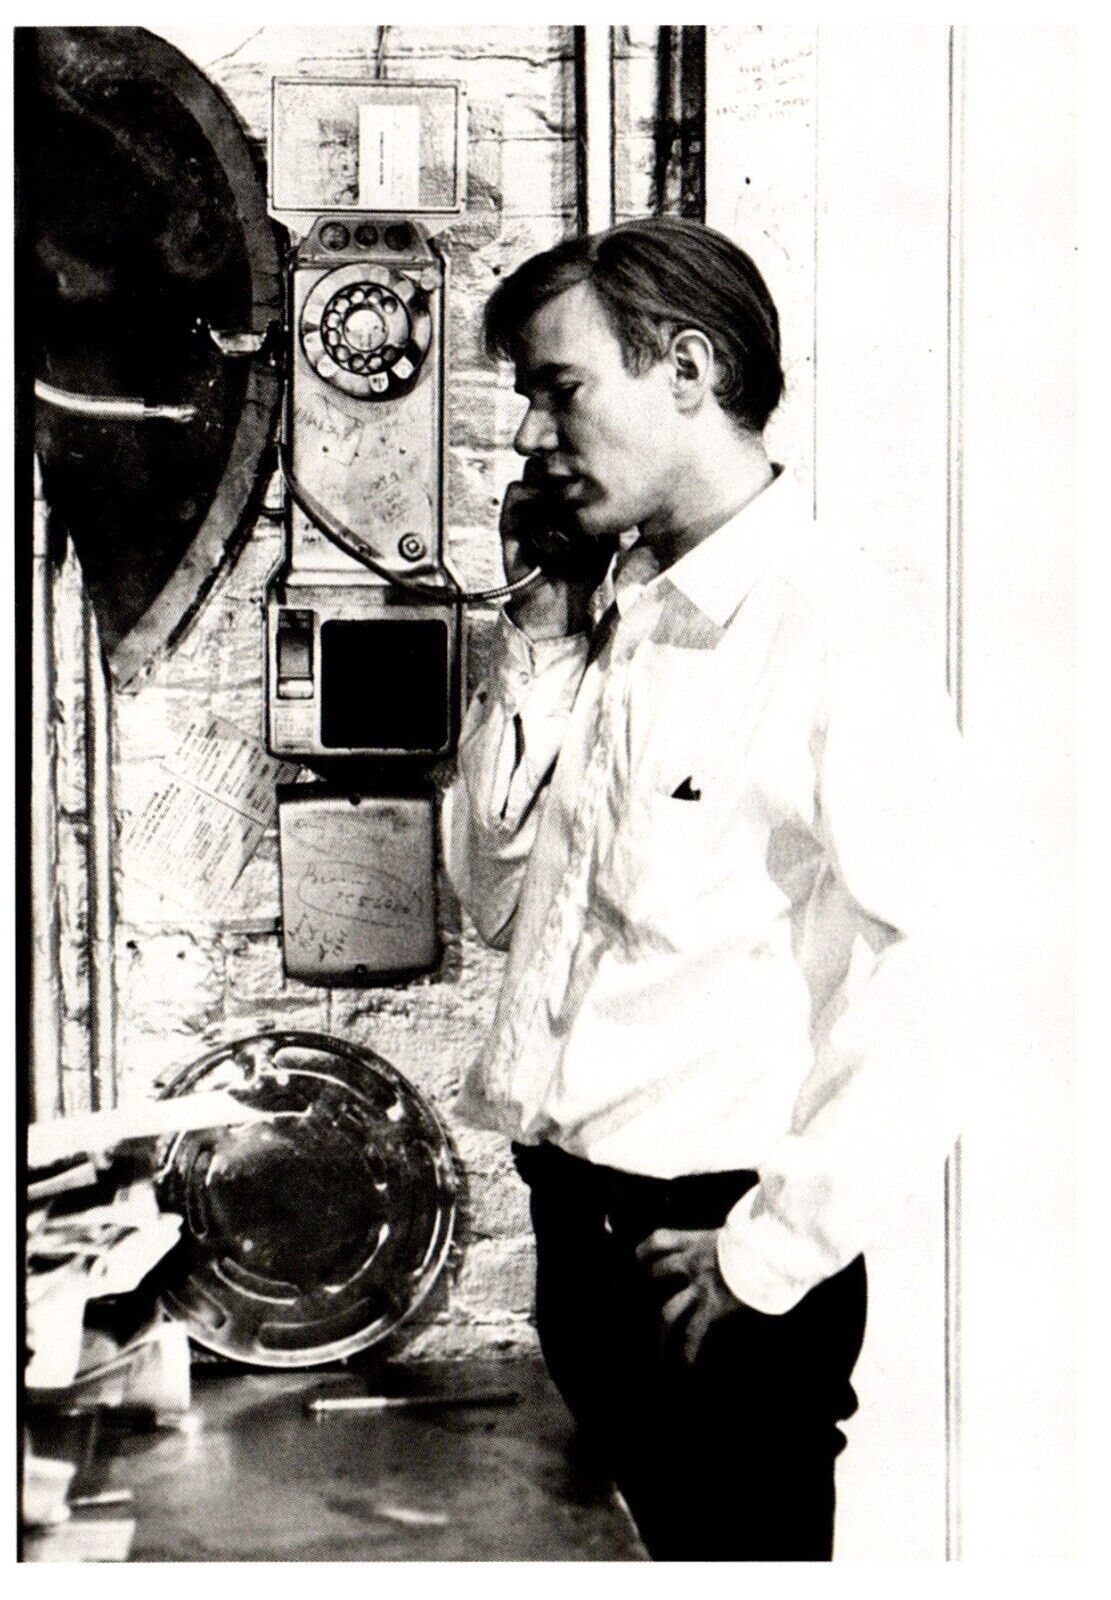 Andy Warhol On Telephone At Silver Factory Photograph By Billy Name Postcard